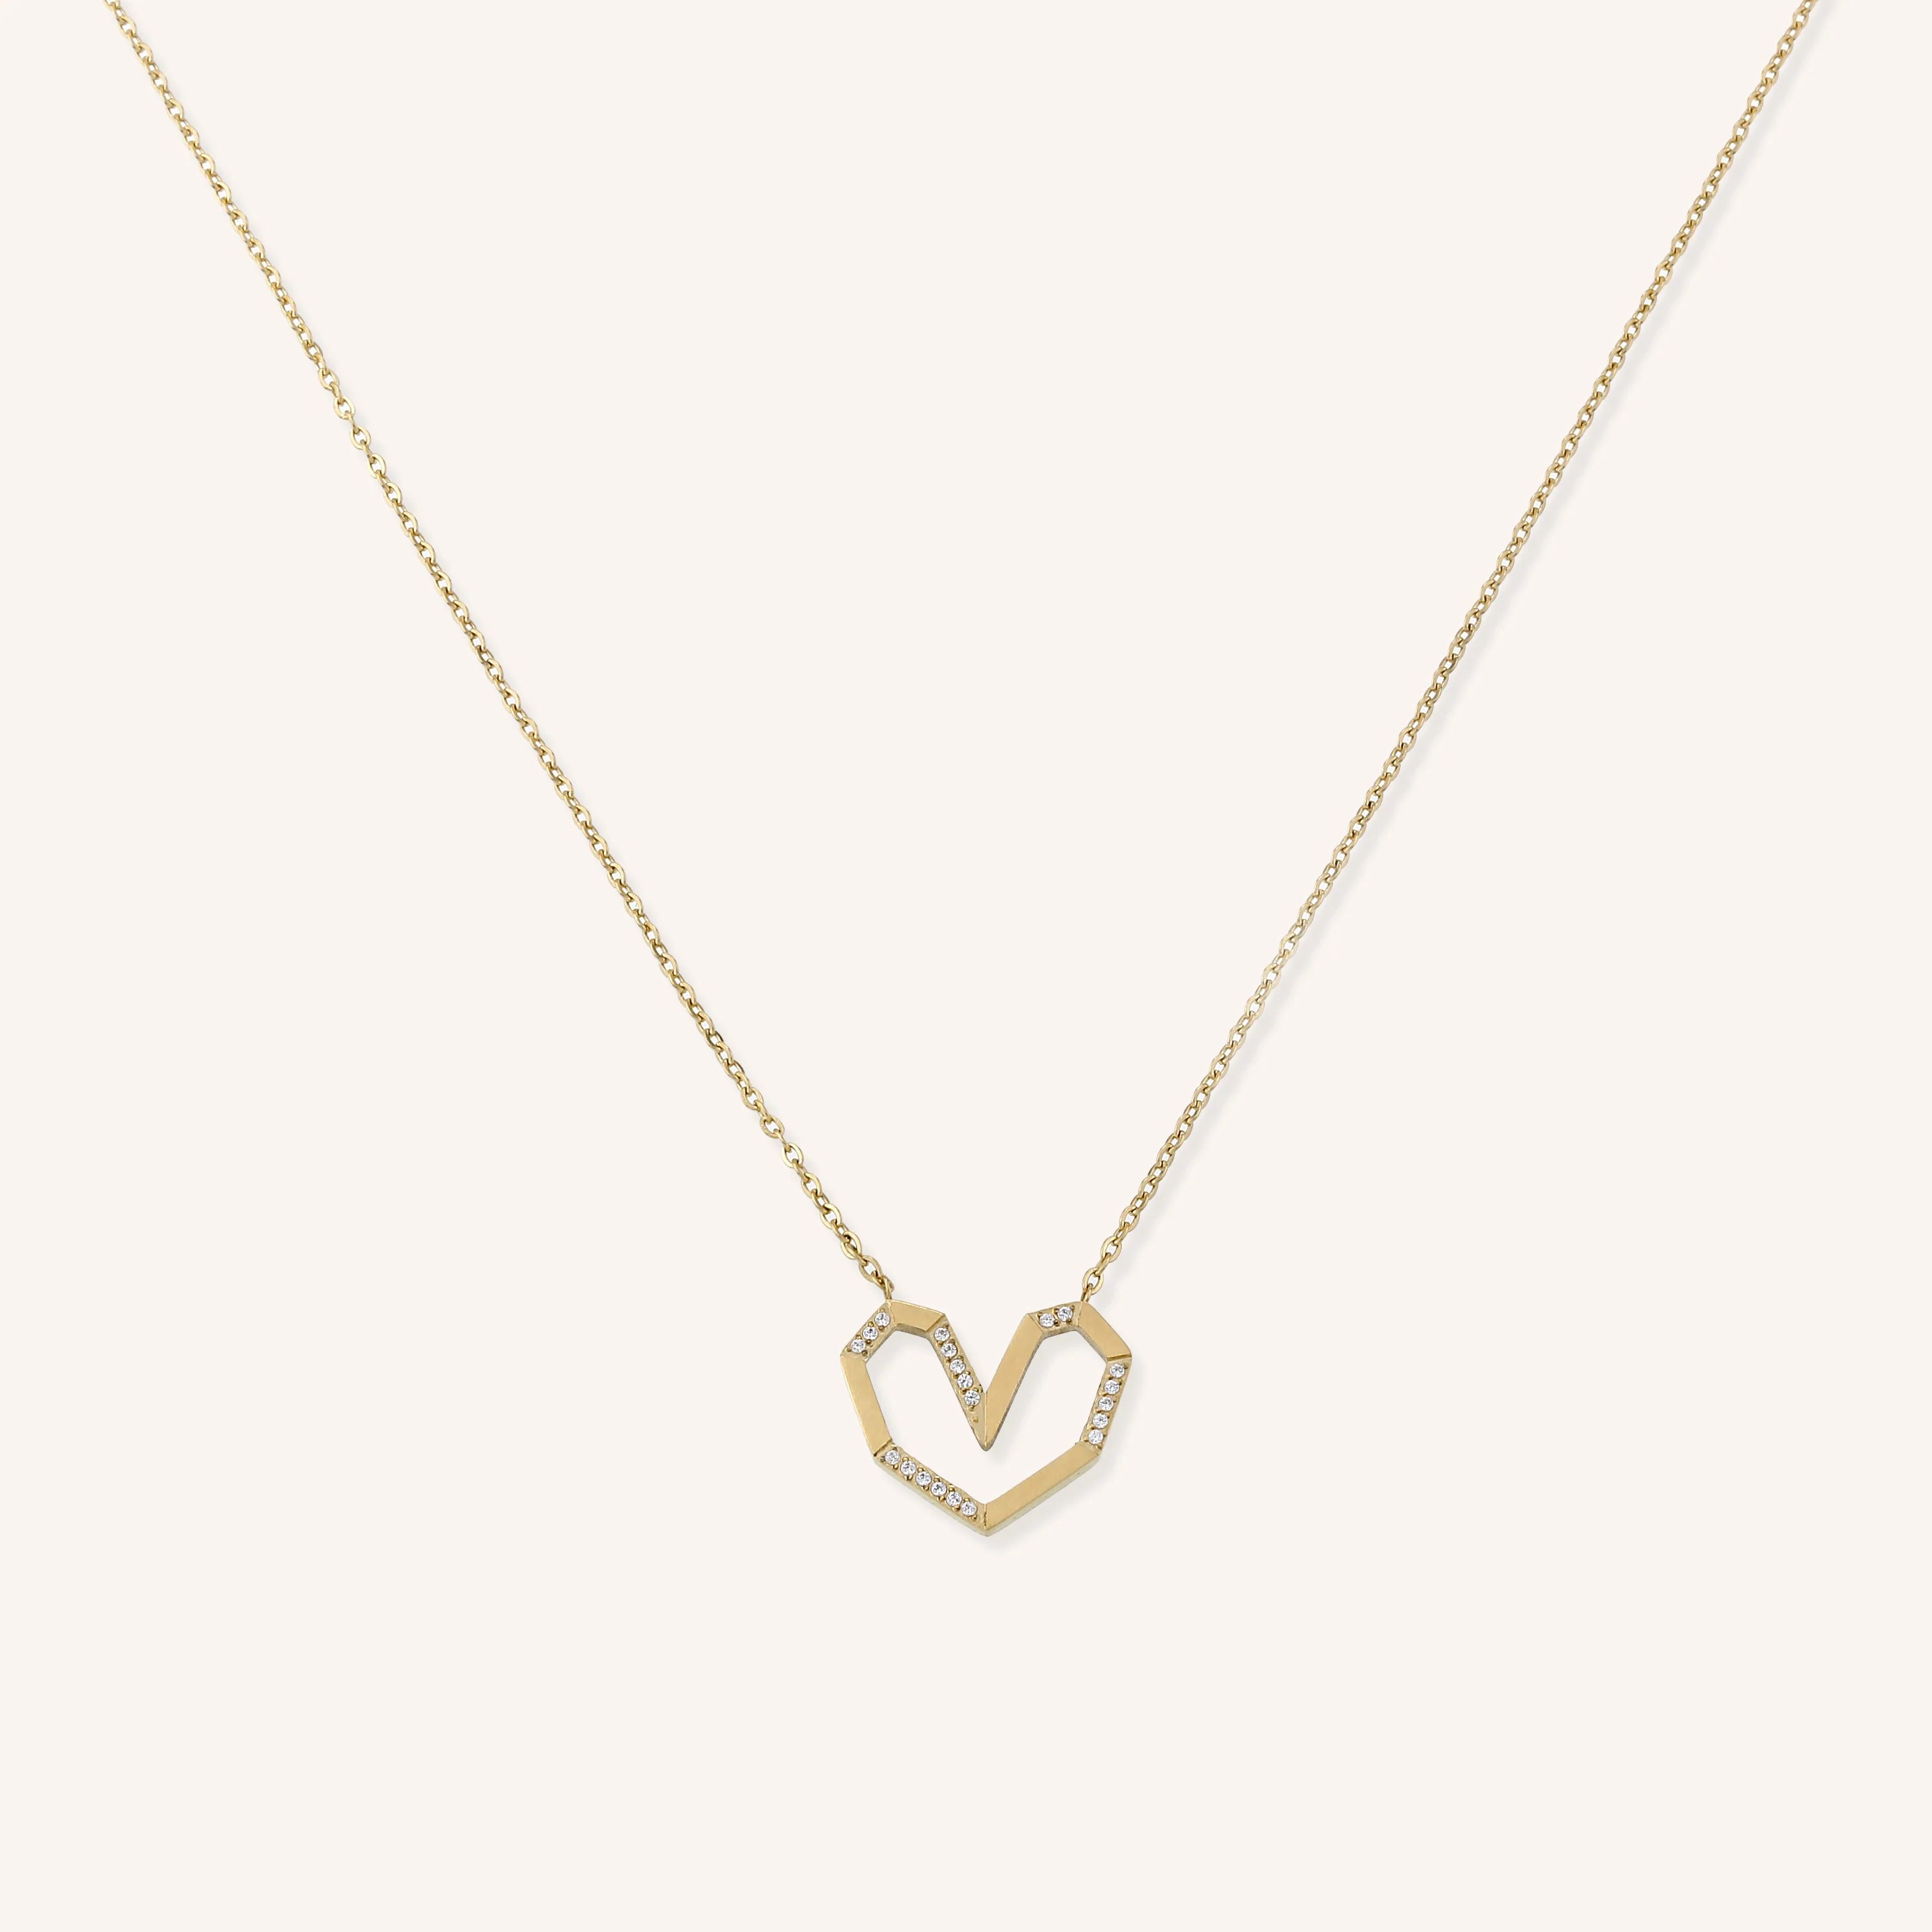 With Love Necklace | Victoria Emerson